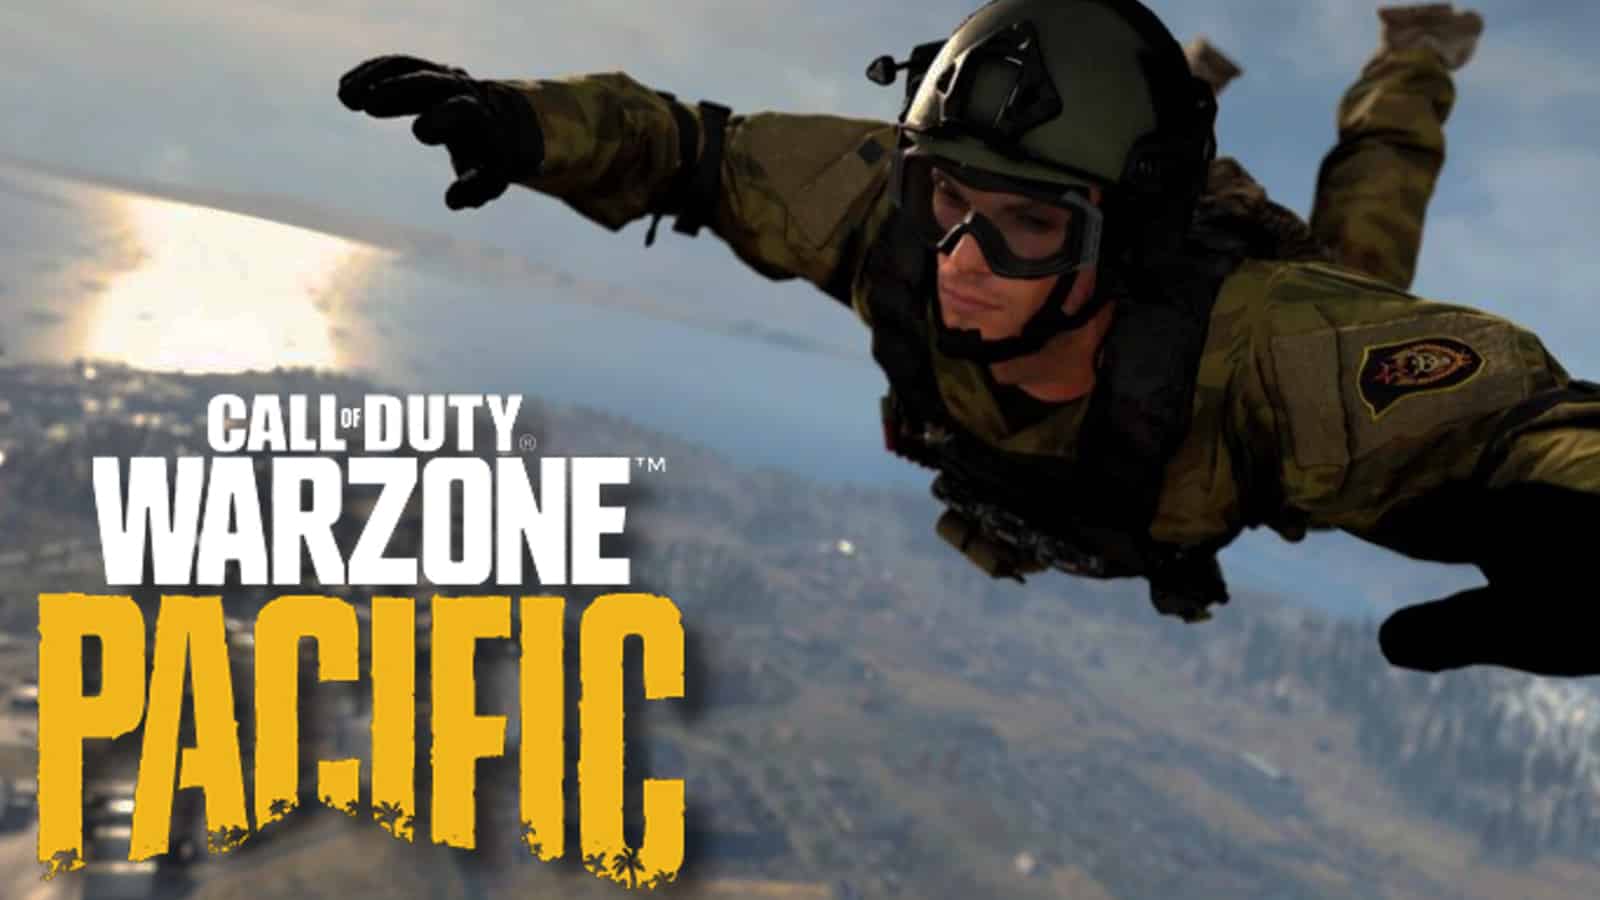 Call of Duty Warzone Pacific Redeploy